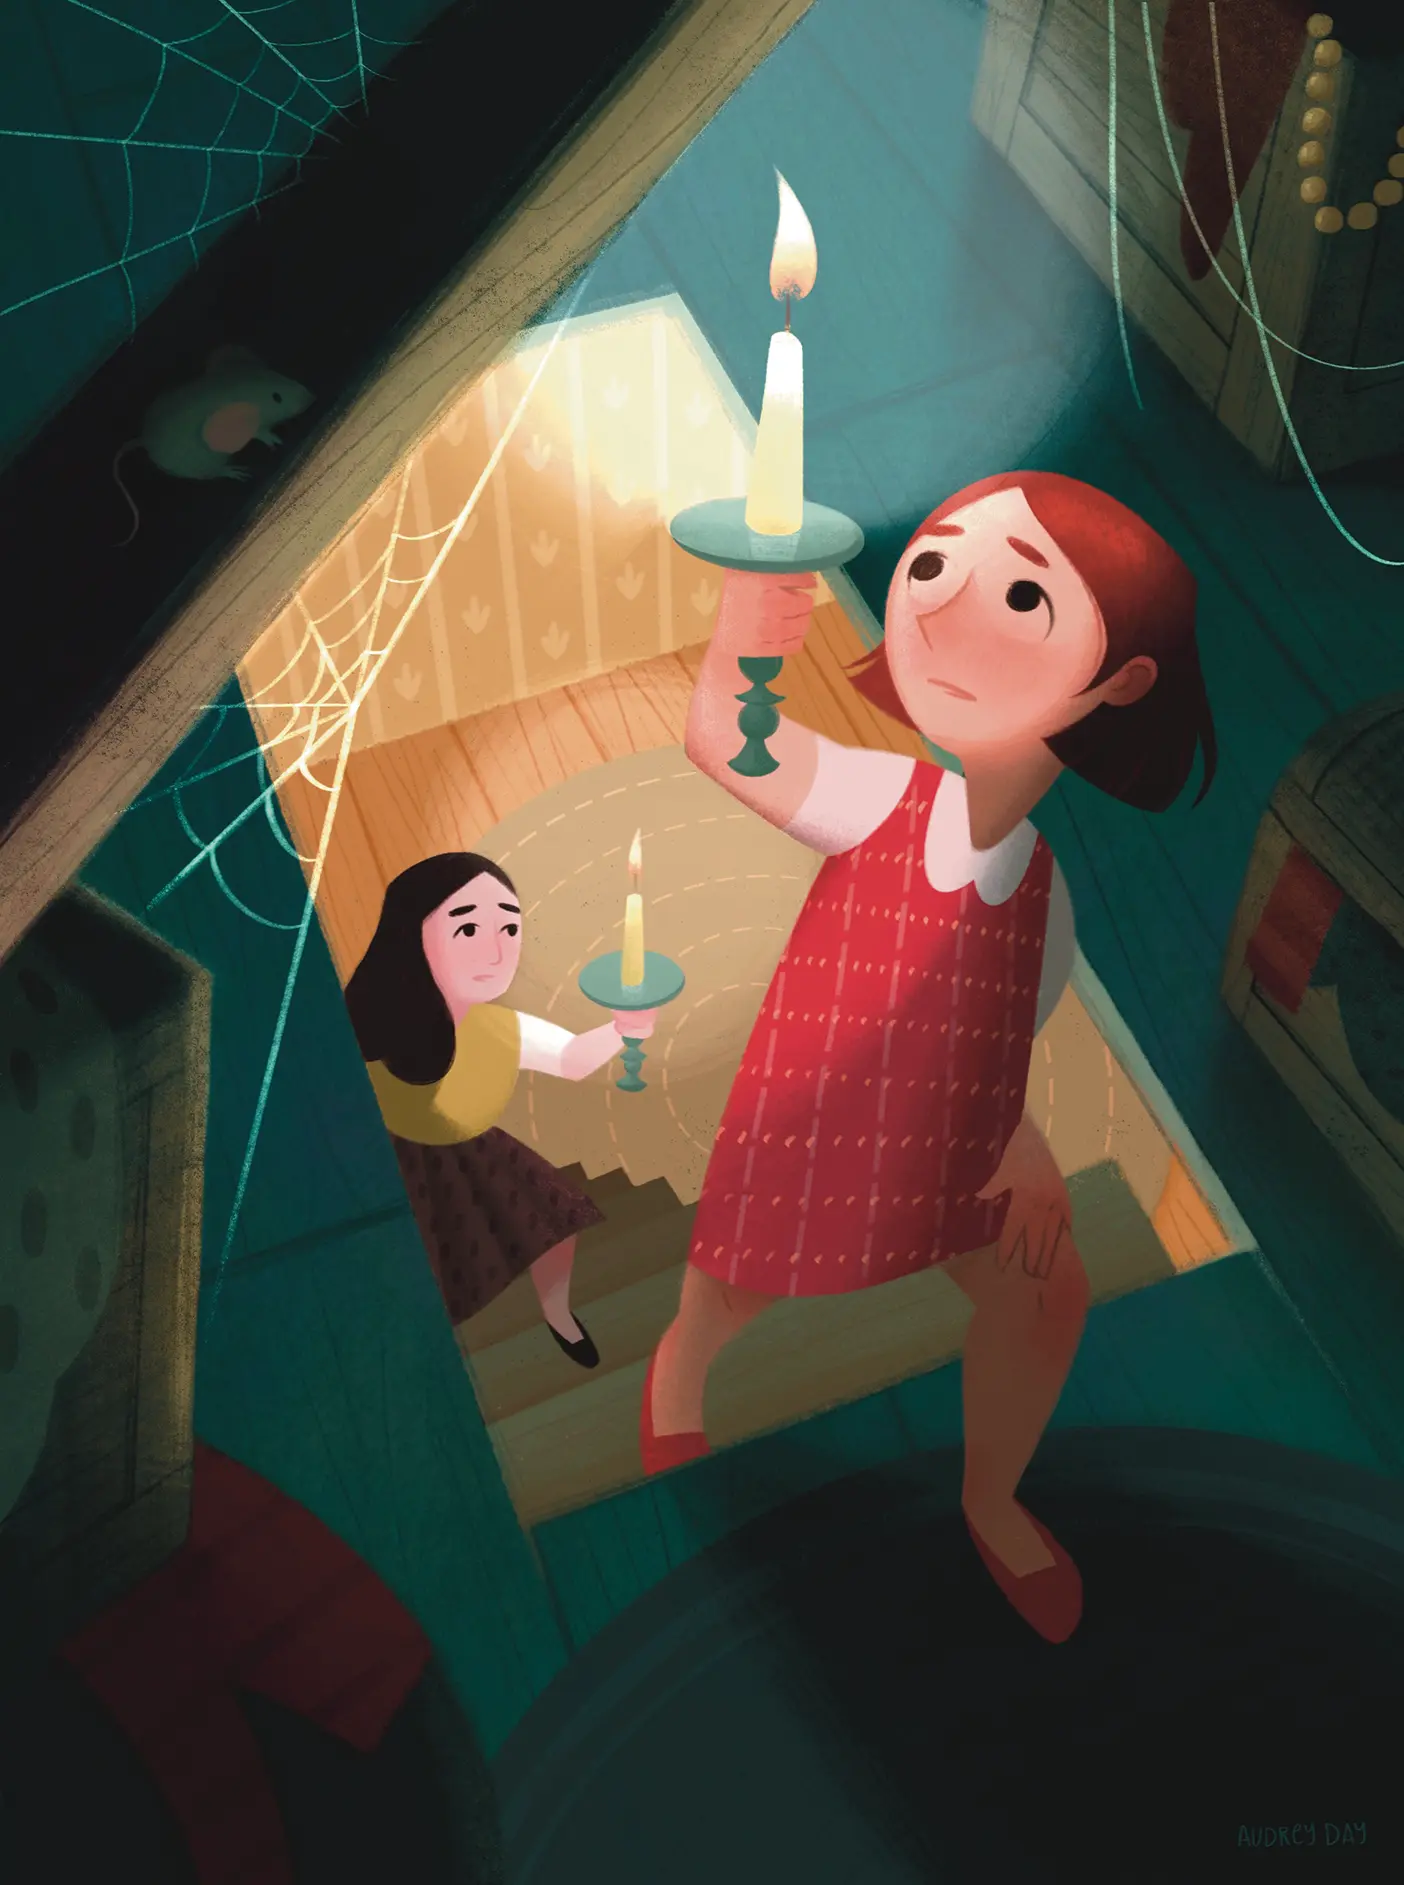 Two young girls walk upstairs into a dark attic while holding candles.